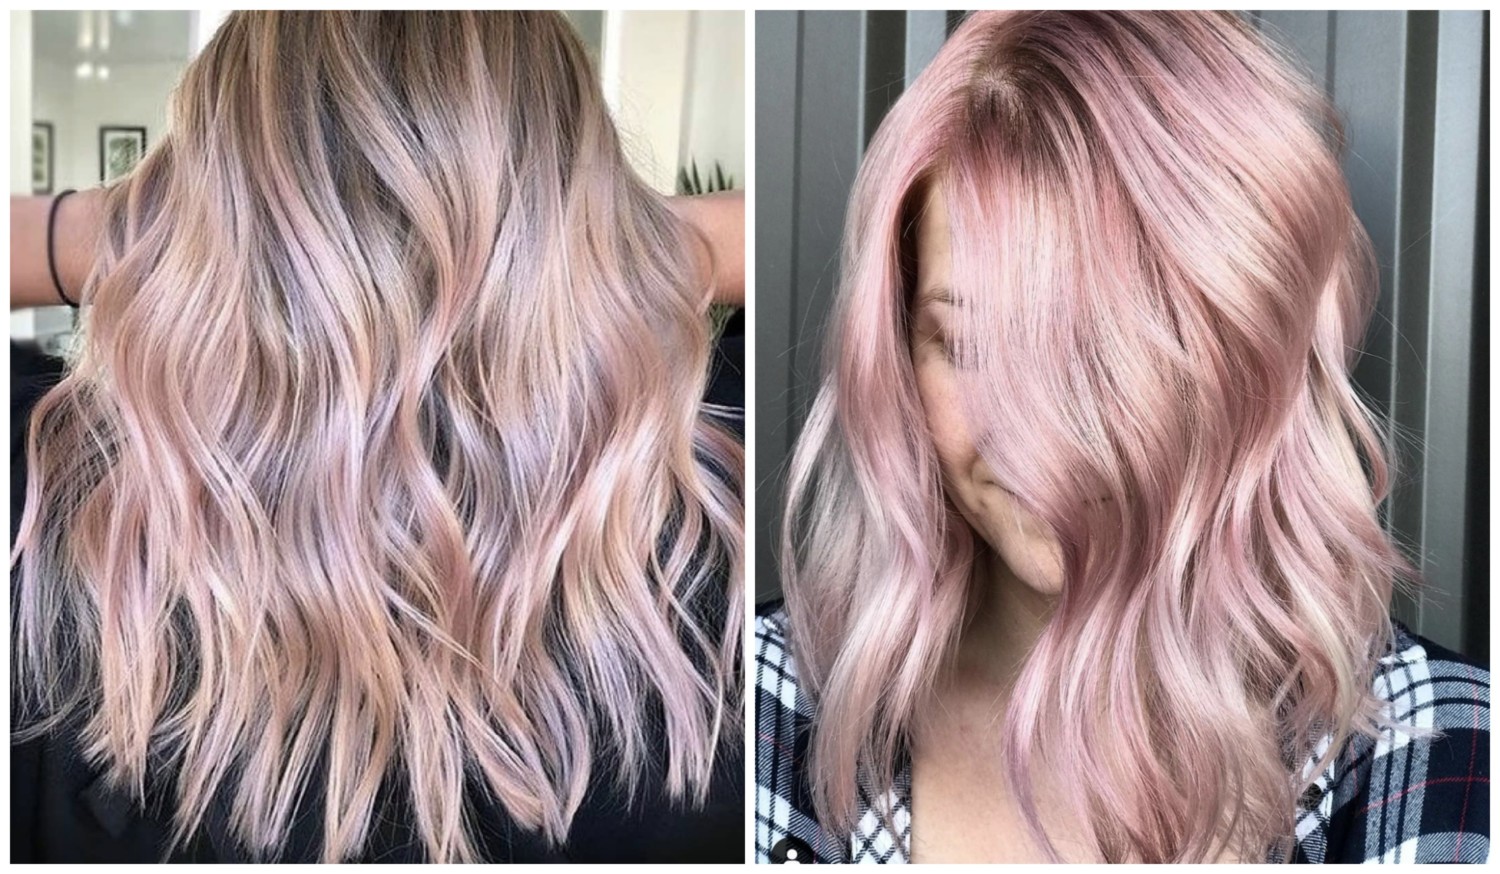 Rose-gold hair is making a comeback this spring